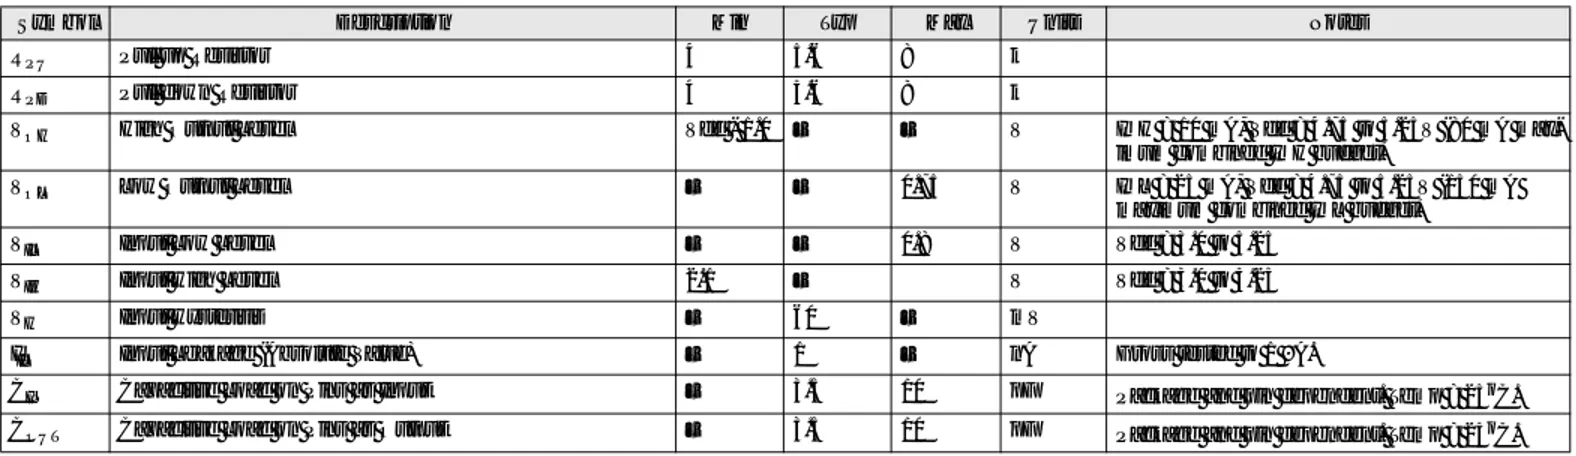 Table 3-5. DC GPIO Specifications